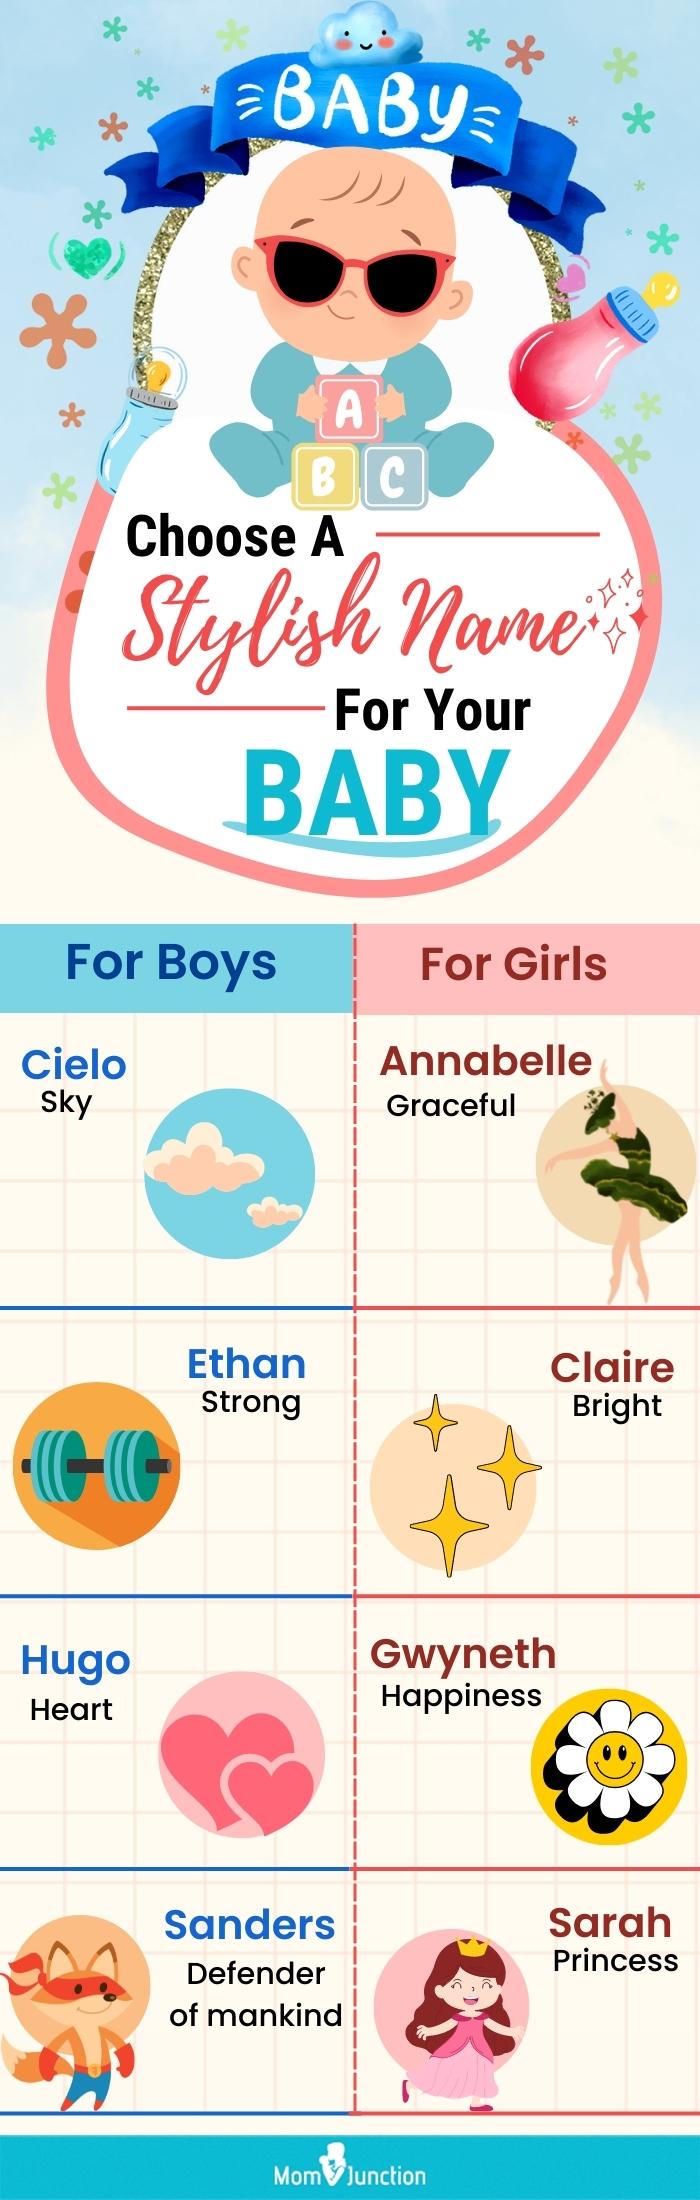 stylish name for your baby (infographic)